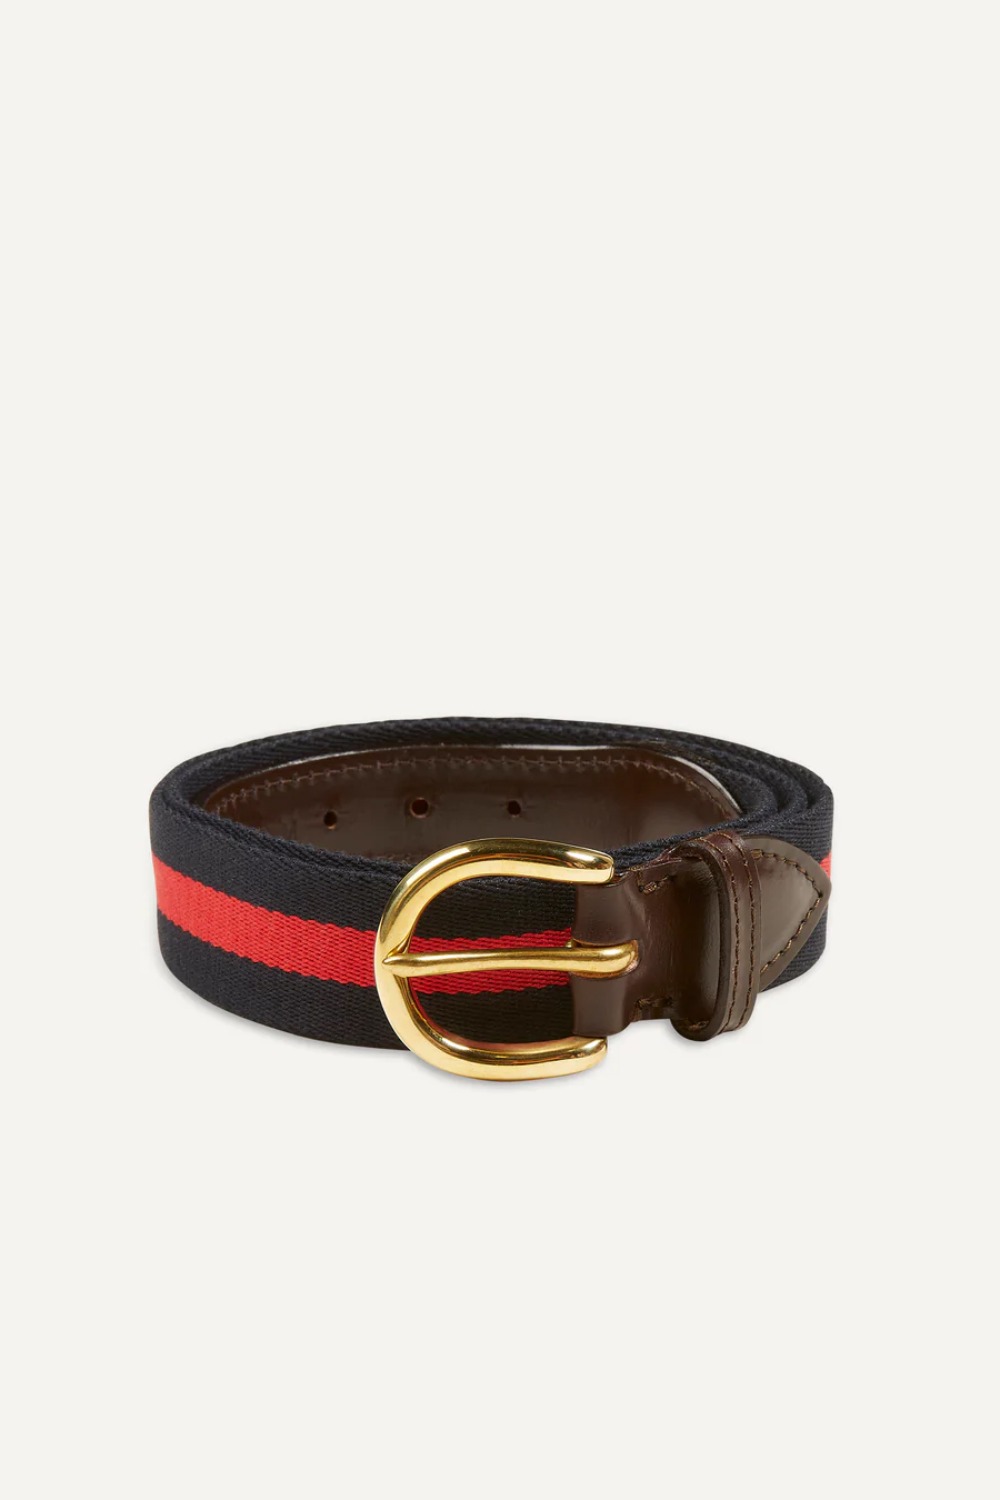 NAVY AND RED STRIPE WEBBING AND LEATHER BELT WITH BRASS BUCKLE